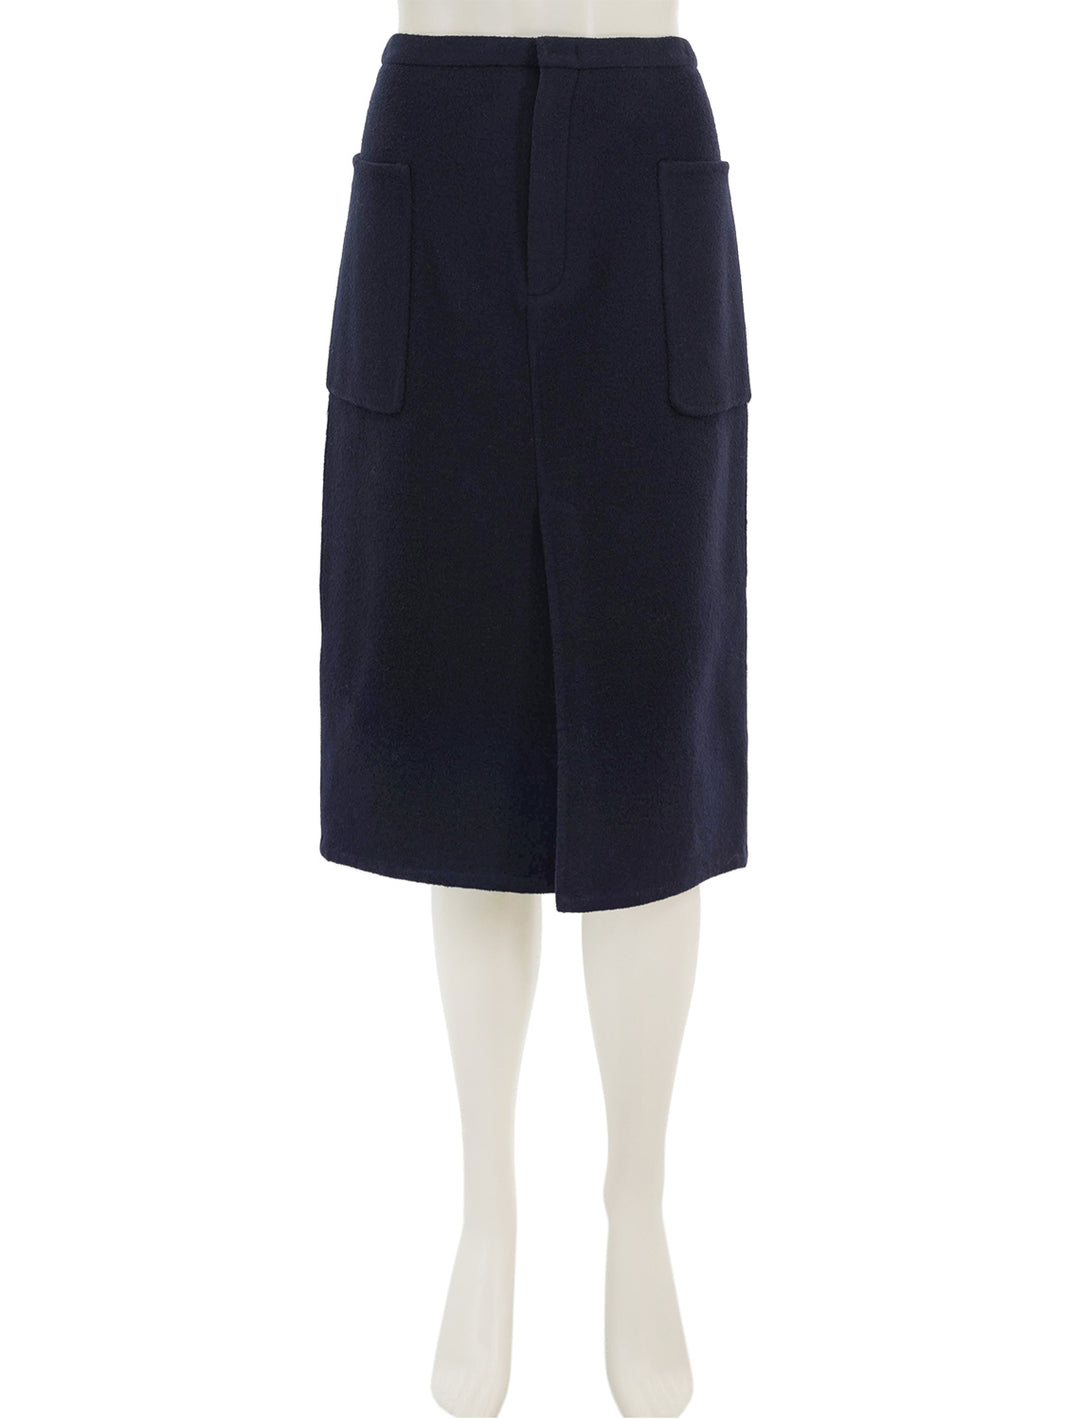 Front view of Vince's brushed wool pencil skirt in deep caspian.